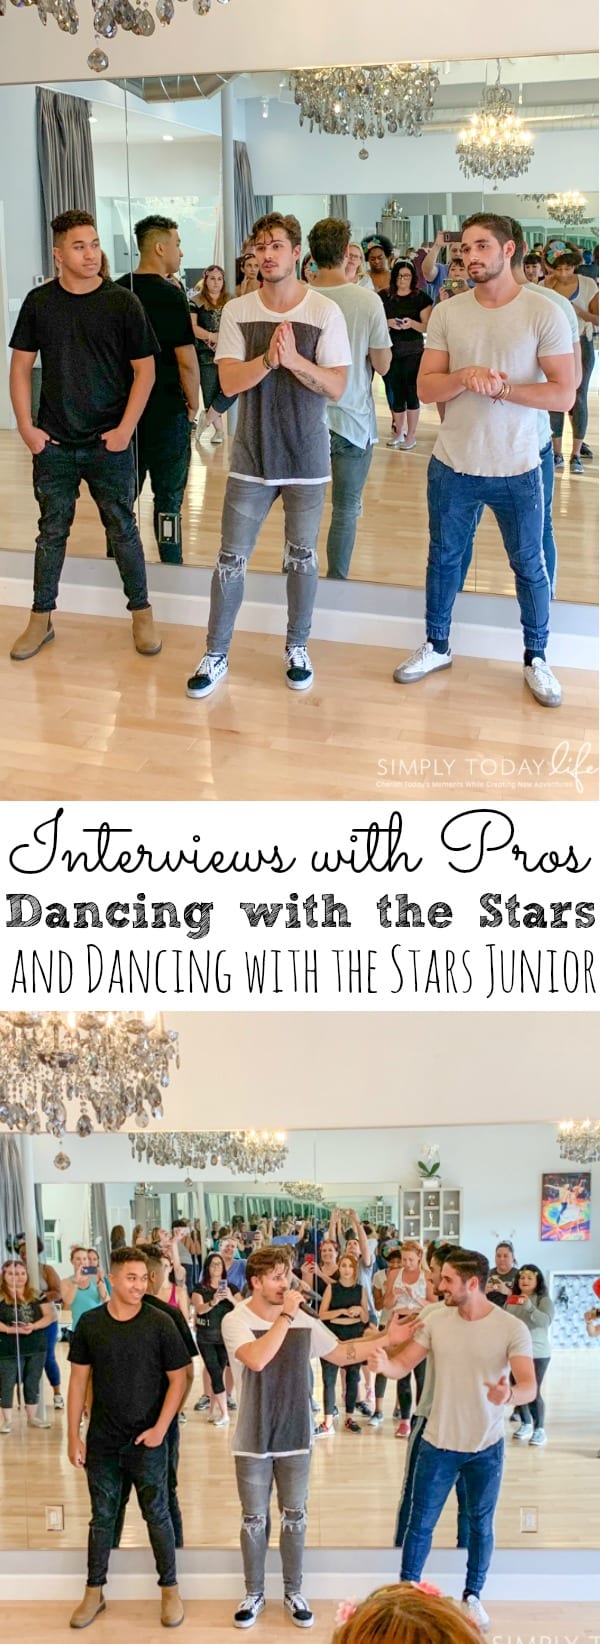 Interviews with Dancing with the Stars and Dancing with the Stars Junior Pros